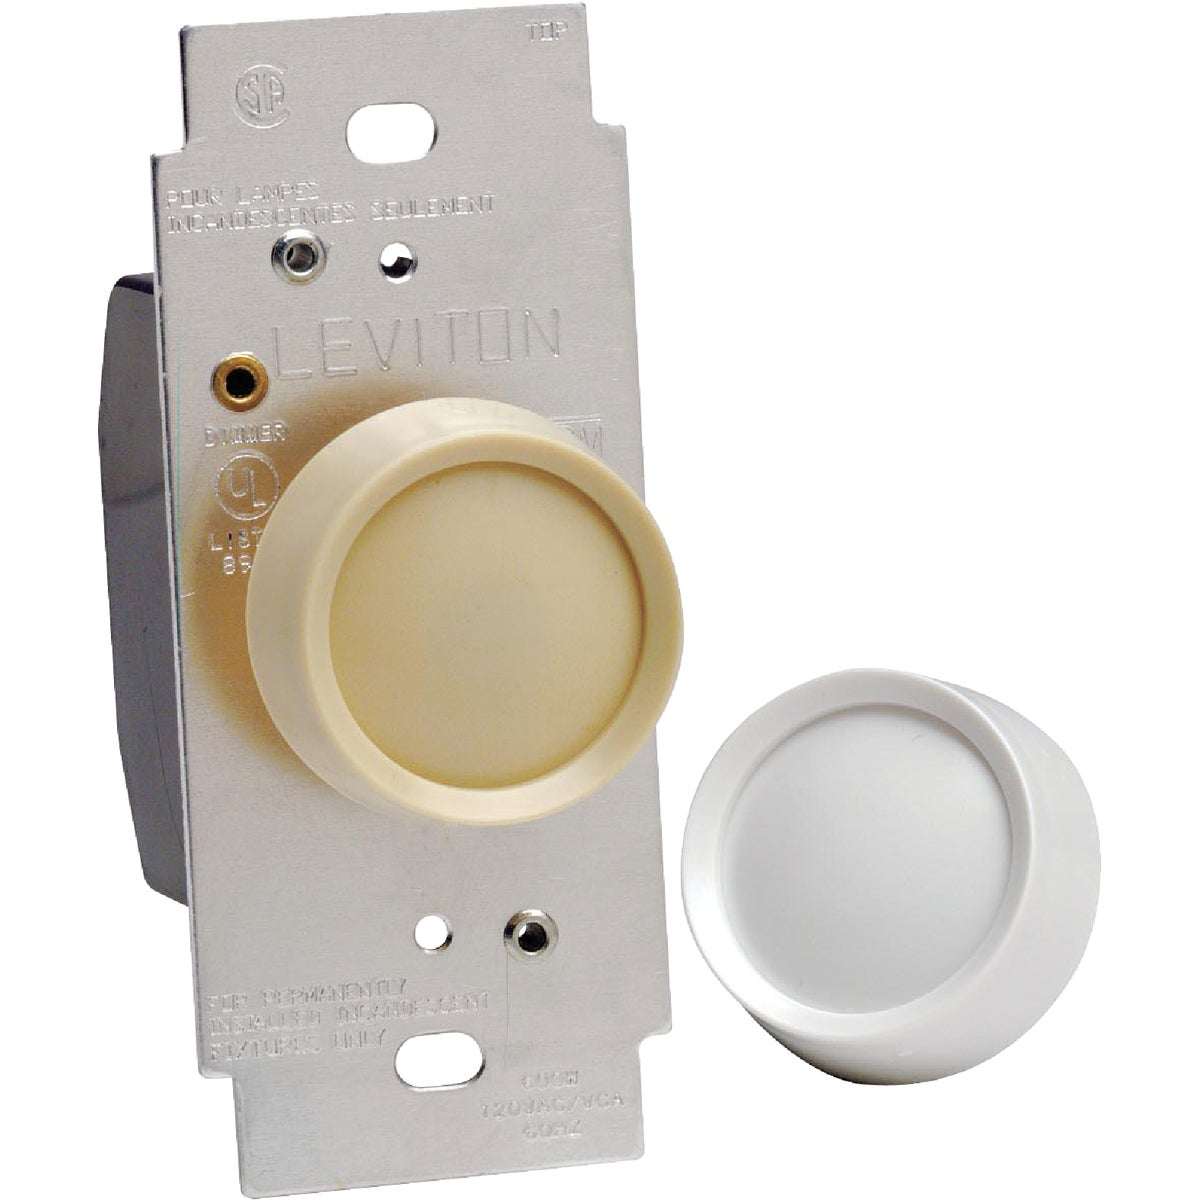 Item 502482, Universal turn on/off single pole, rotary dimmer switch.